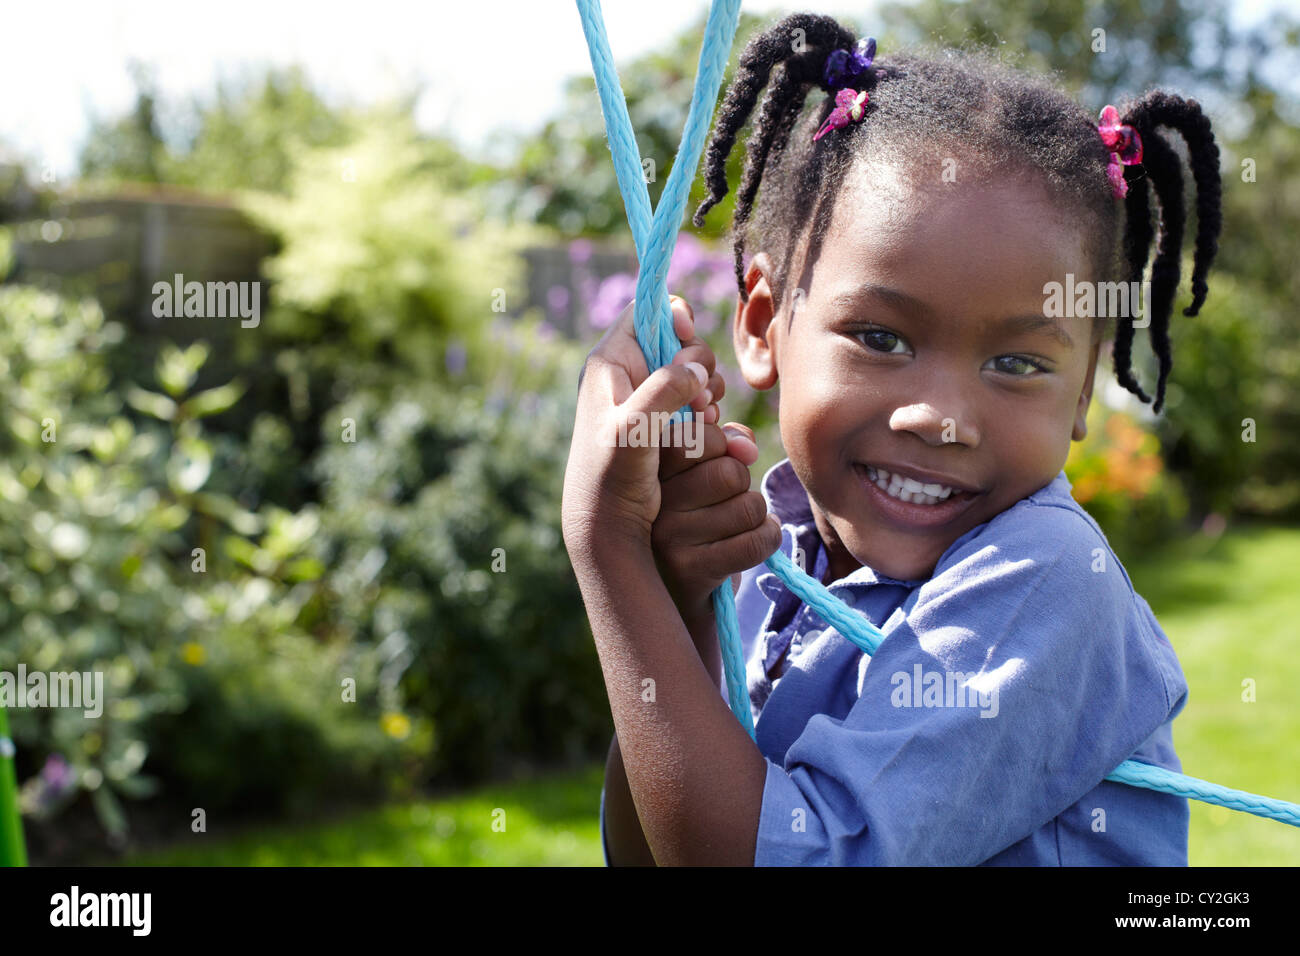 Five year old black girl on swing looking at camera and smiling Stock Photo